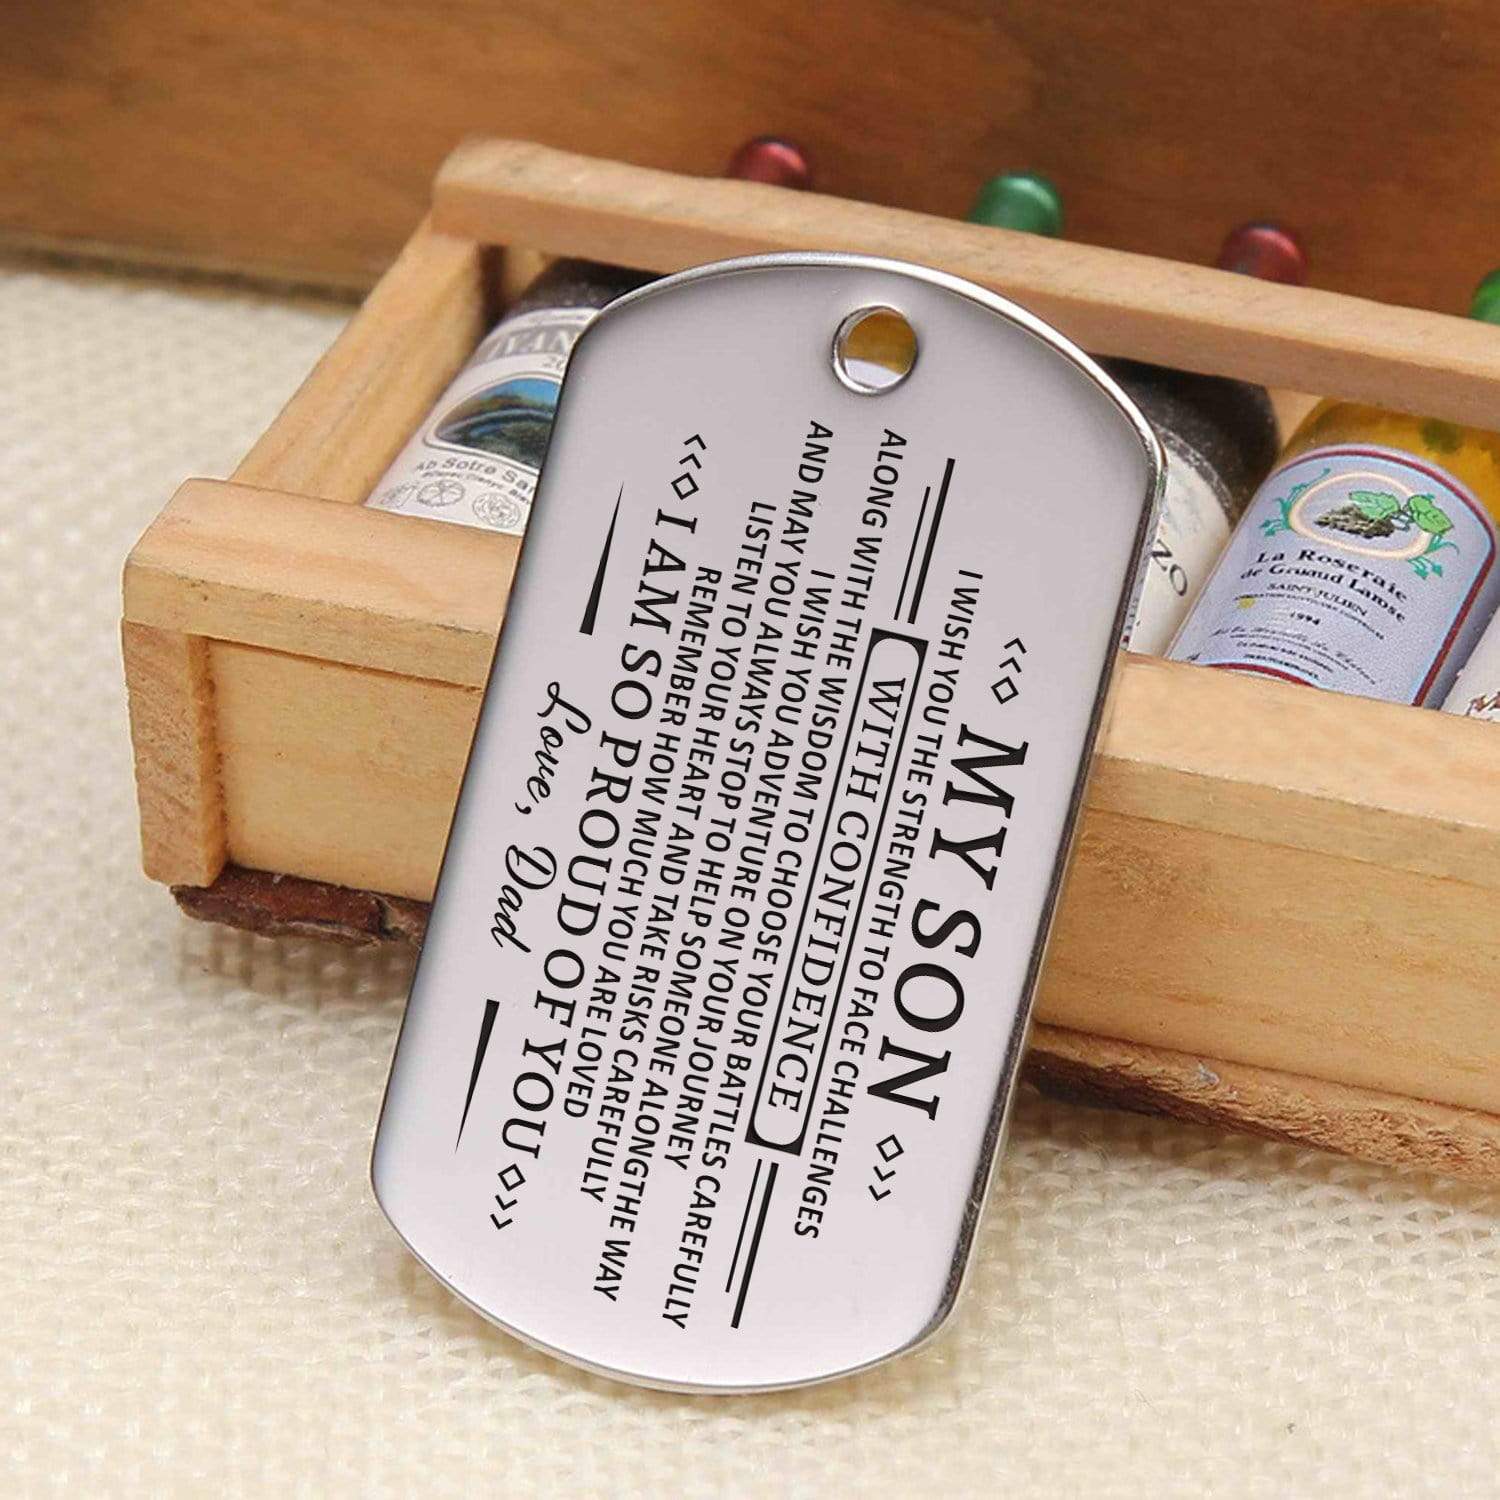 Keychains Dad To Son - Remember How Much You Are Loved Personalized Keychain GiveMe-Gifts